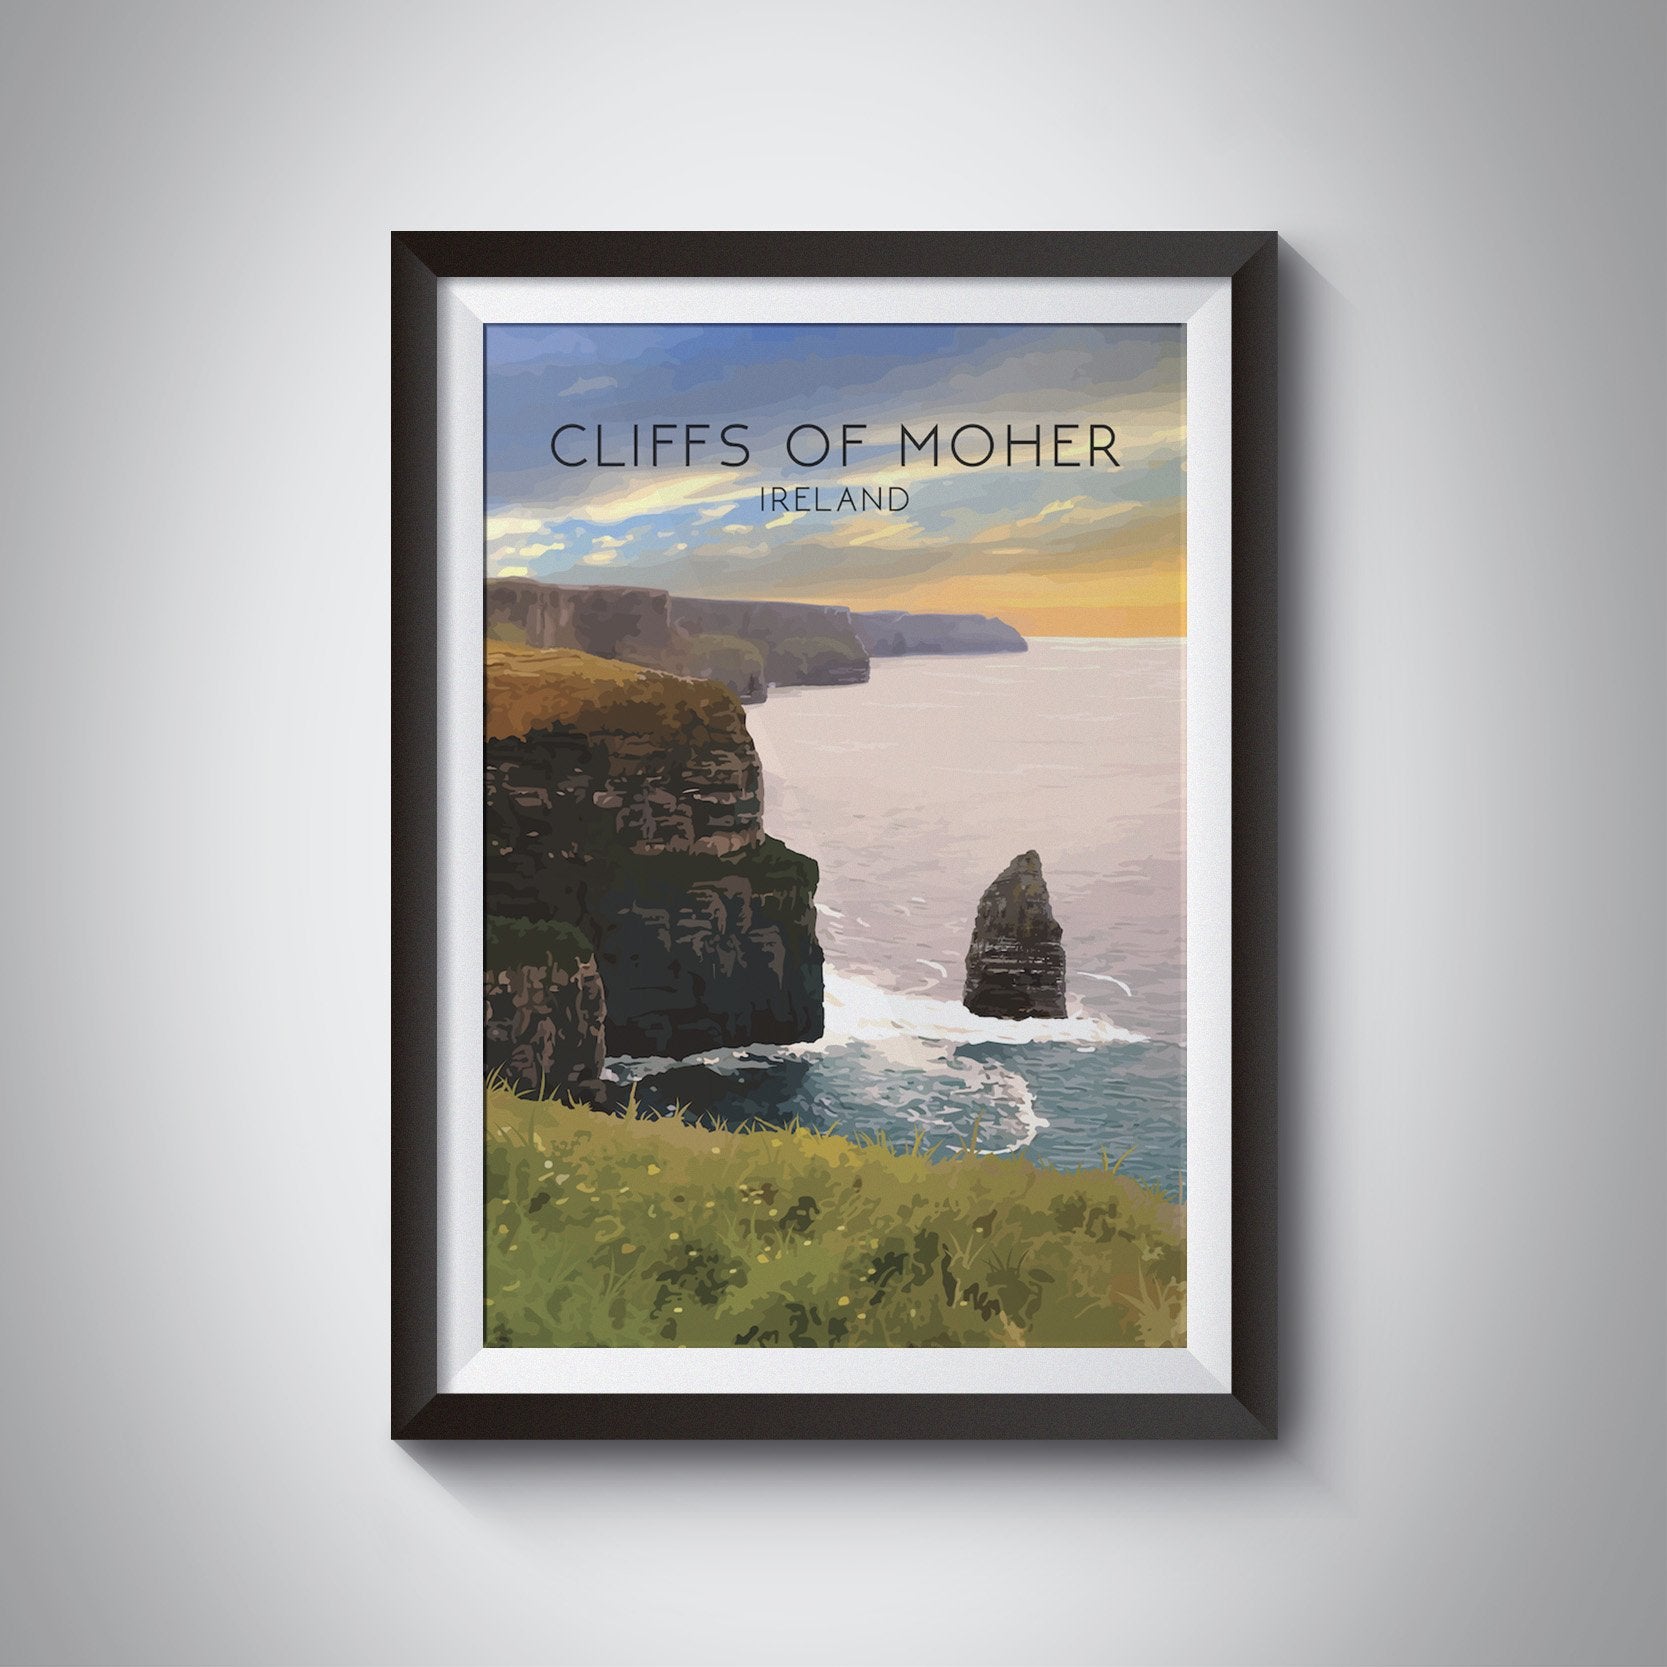 Cliffs of Moher Ireland Travel Poster